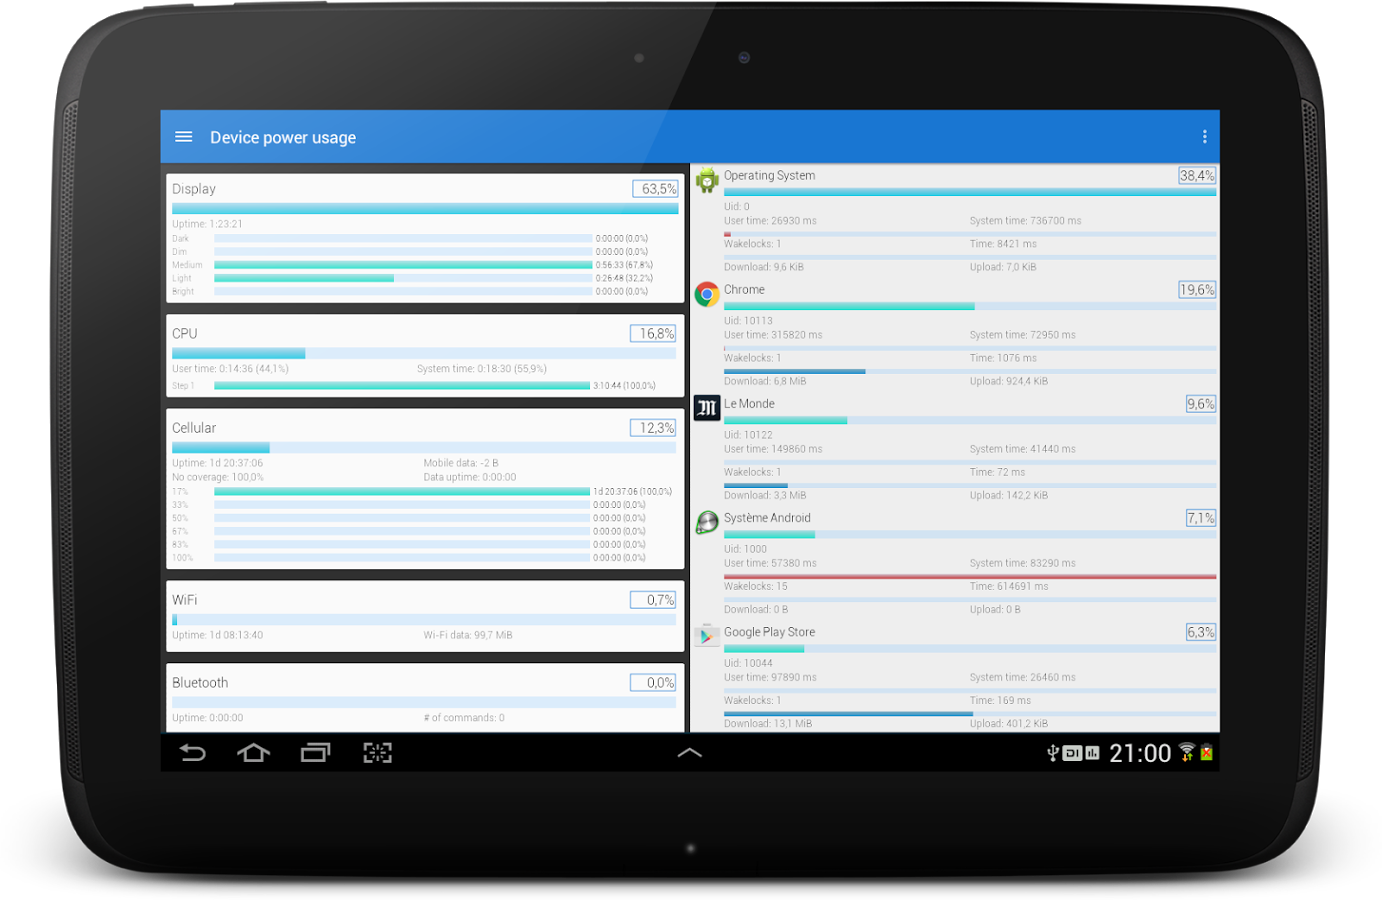 System Manager for Android